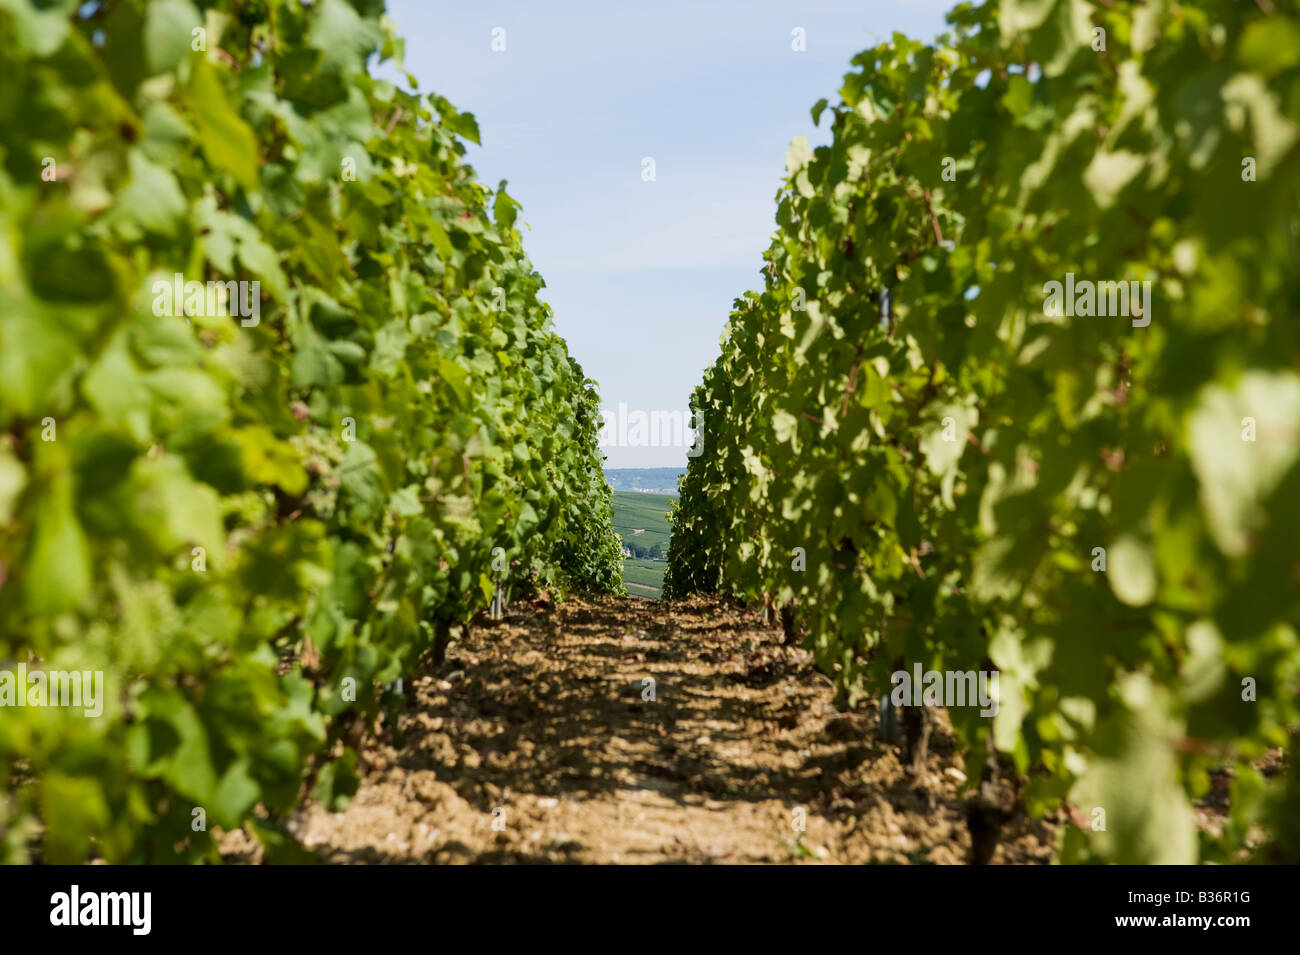 looking down a row of pinot noir vines at chavot france Stock Photo